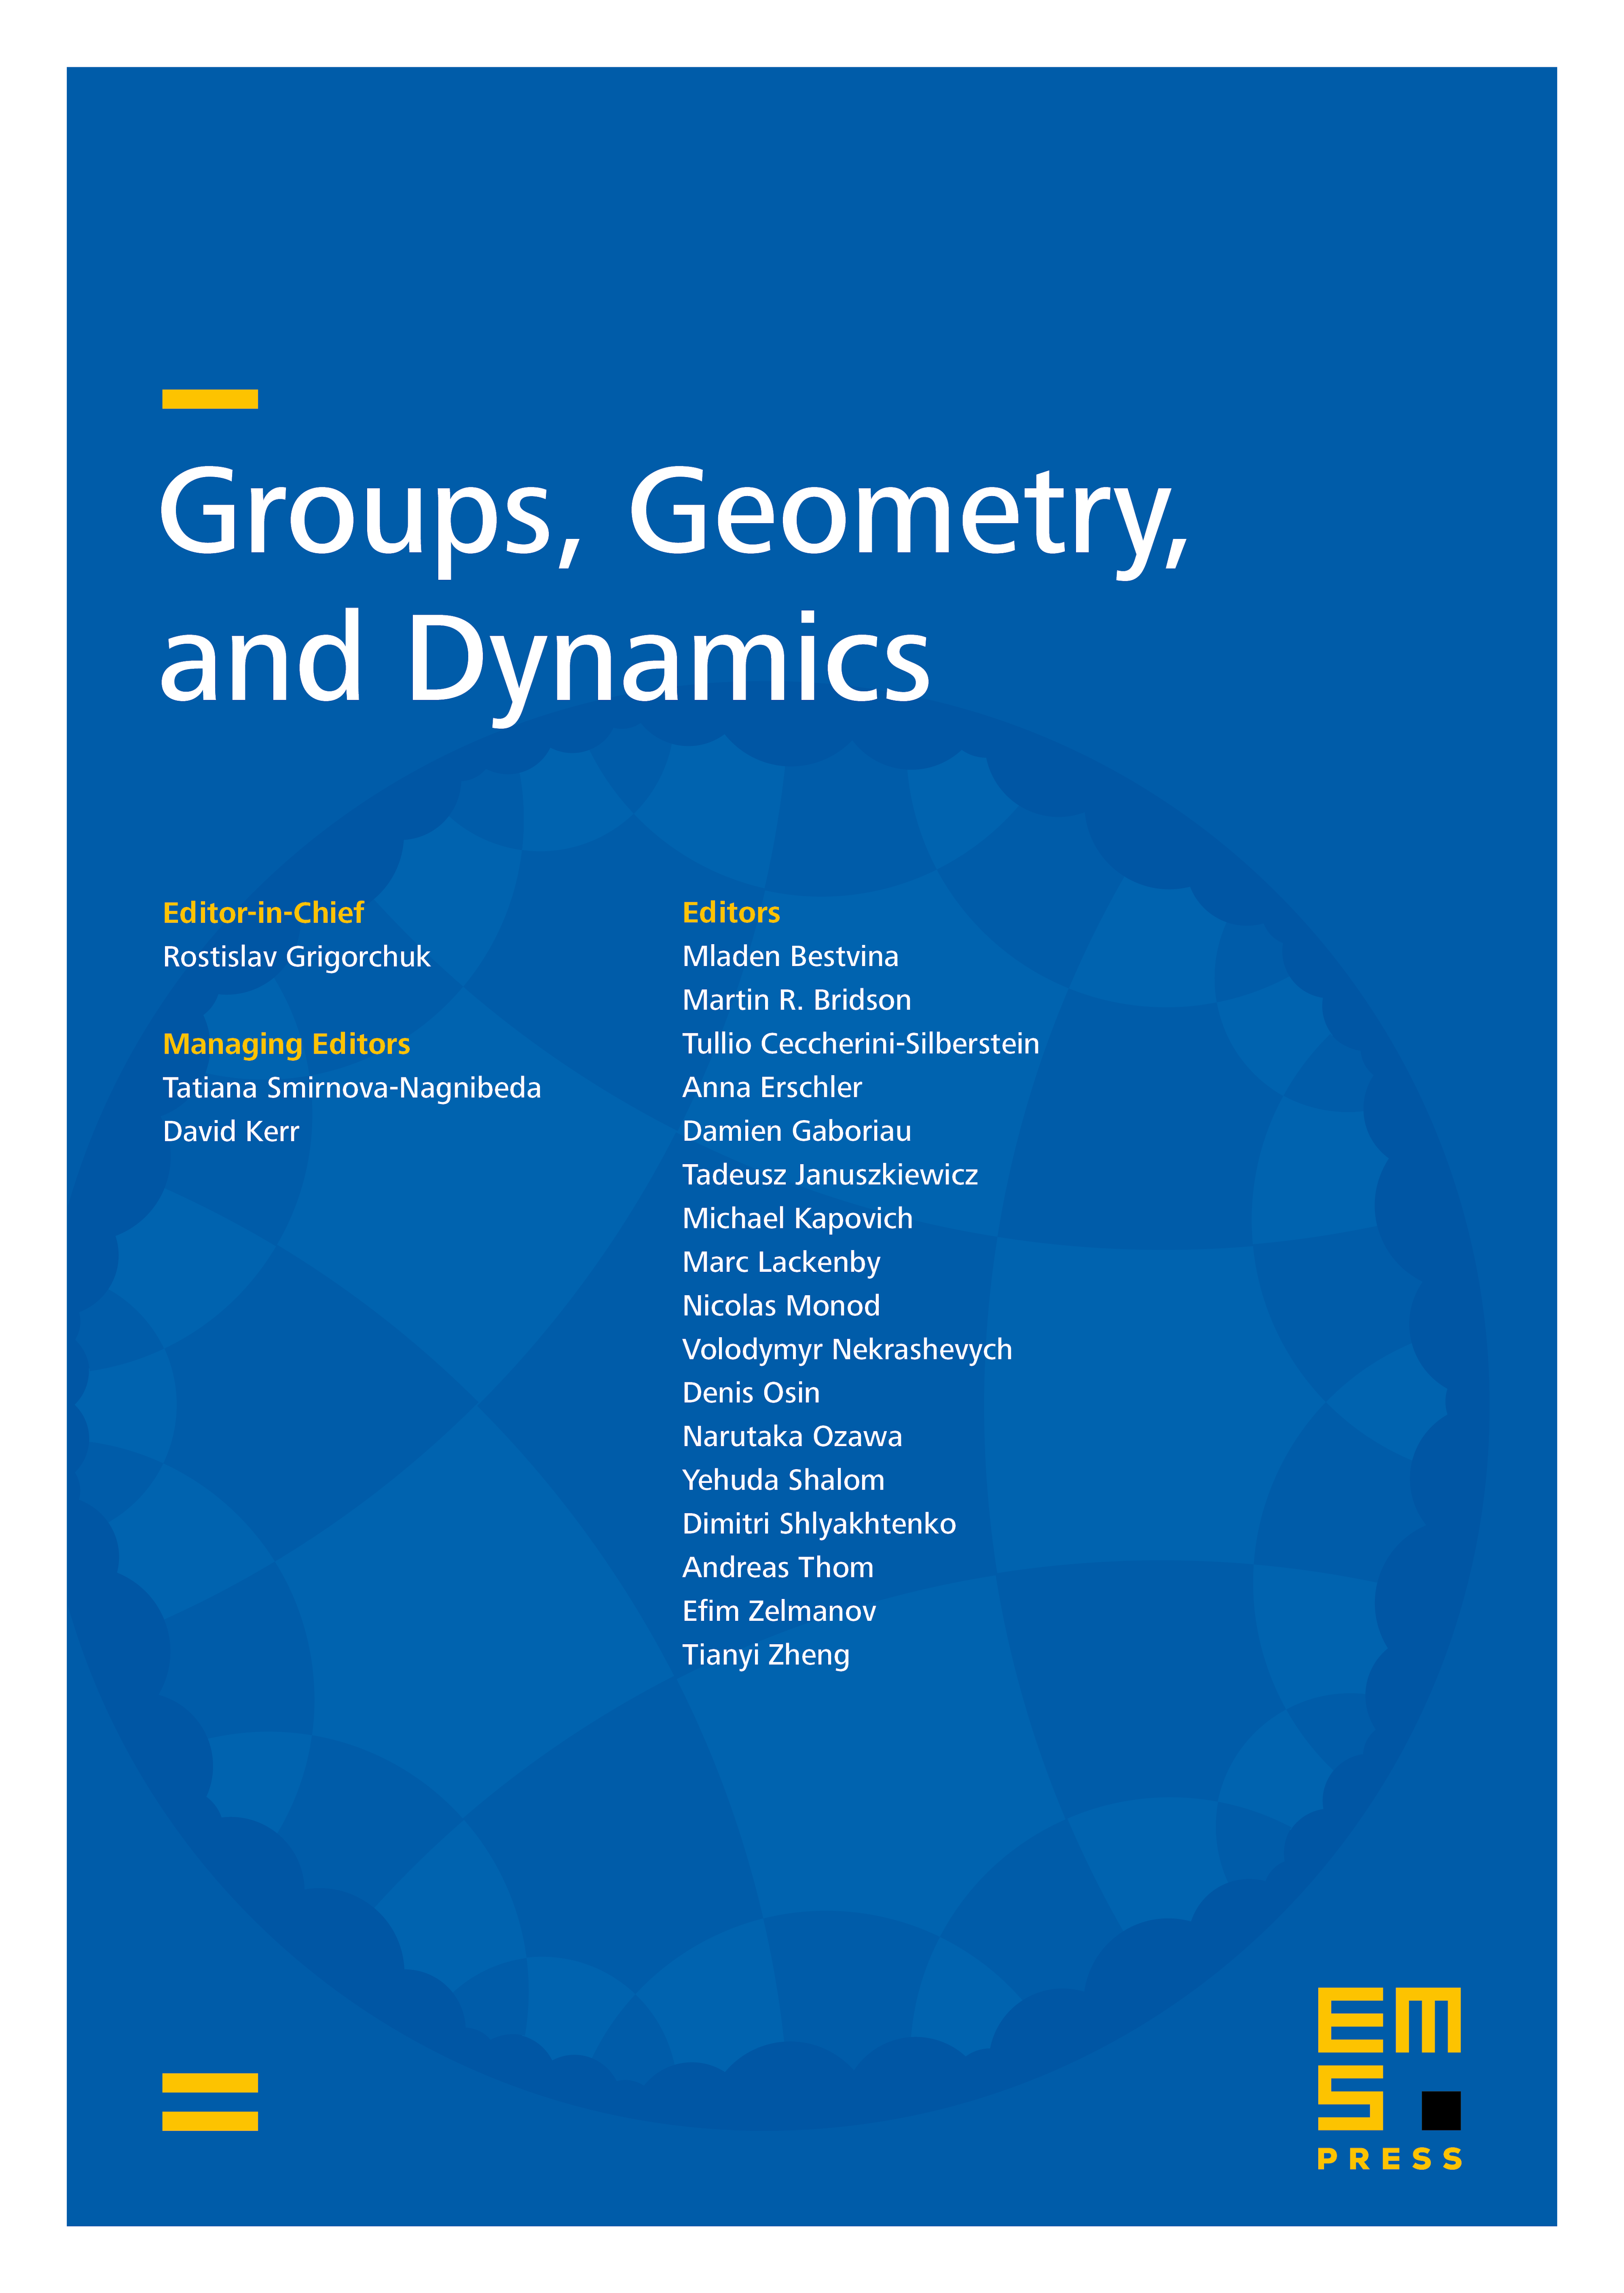 Iterated monodromy groups of Chebyshev-like maps on $\mathbb{C}^n$ cover